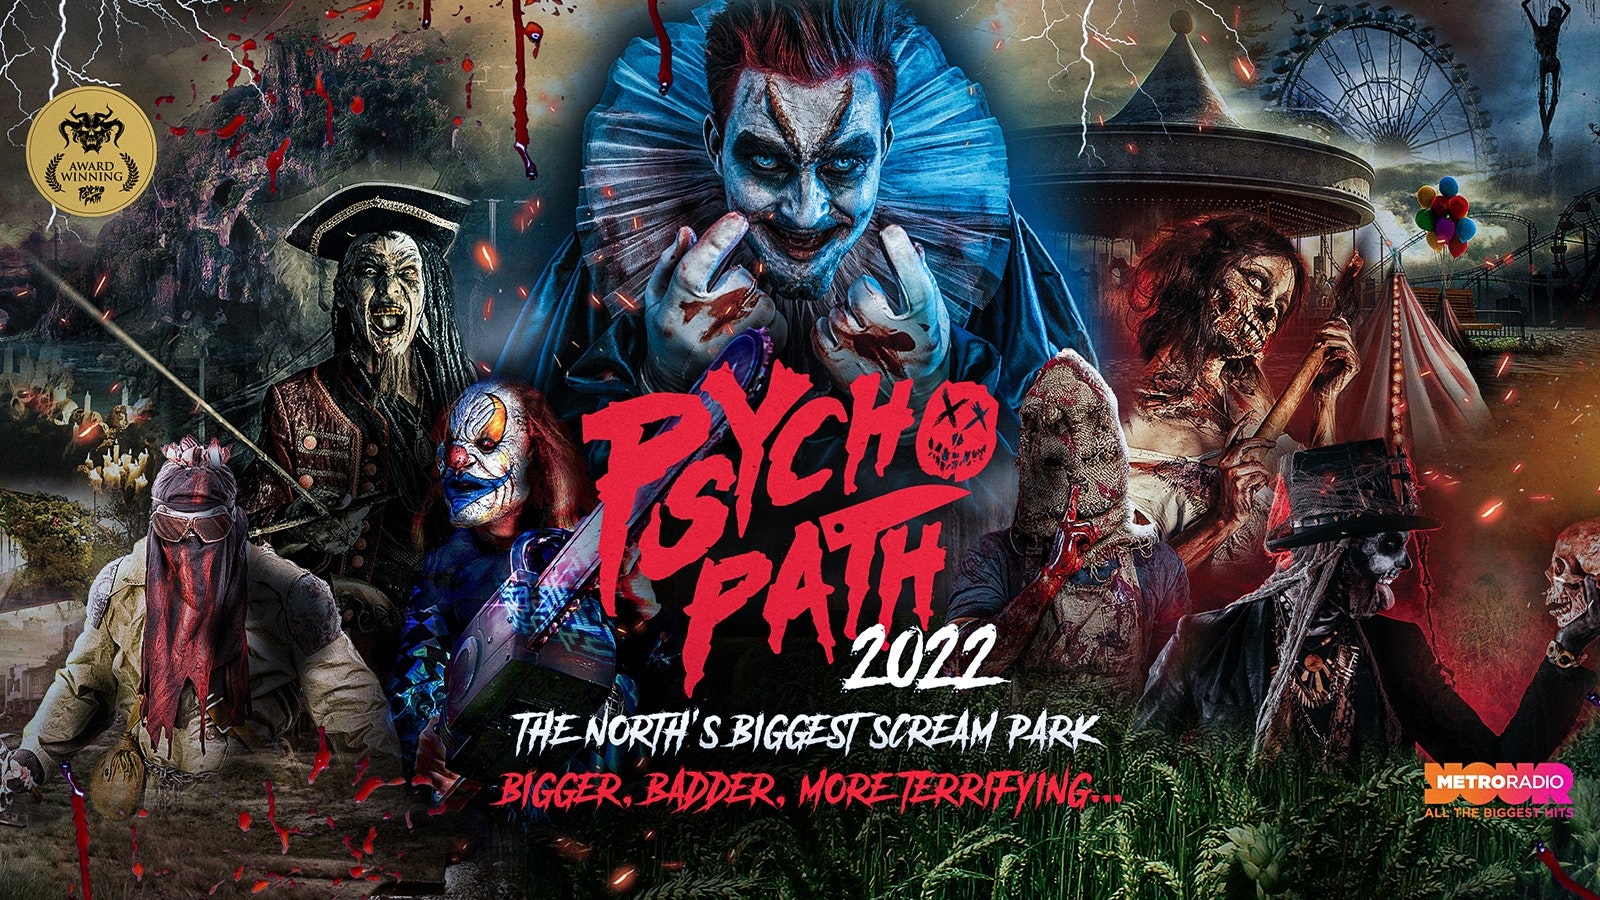 Psycho Path Presents FearGround – Sep 30th